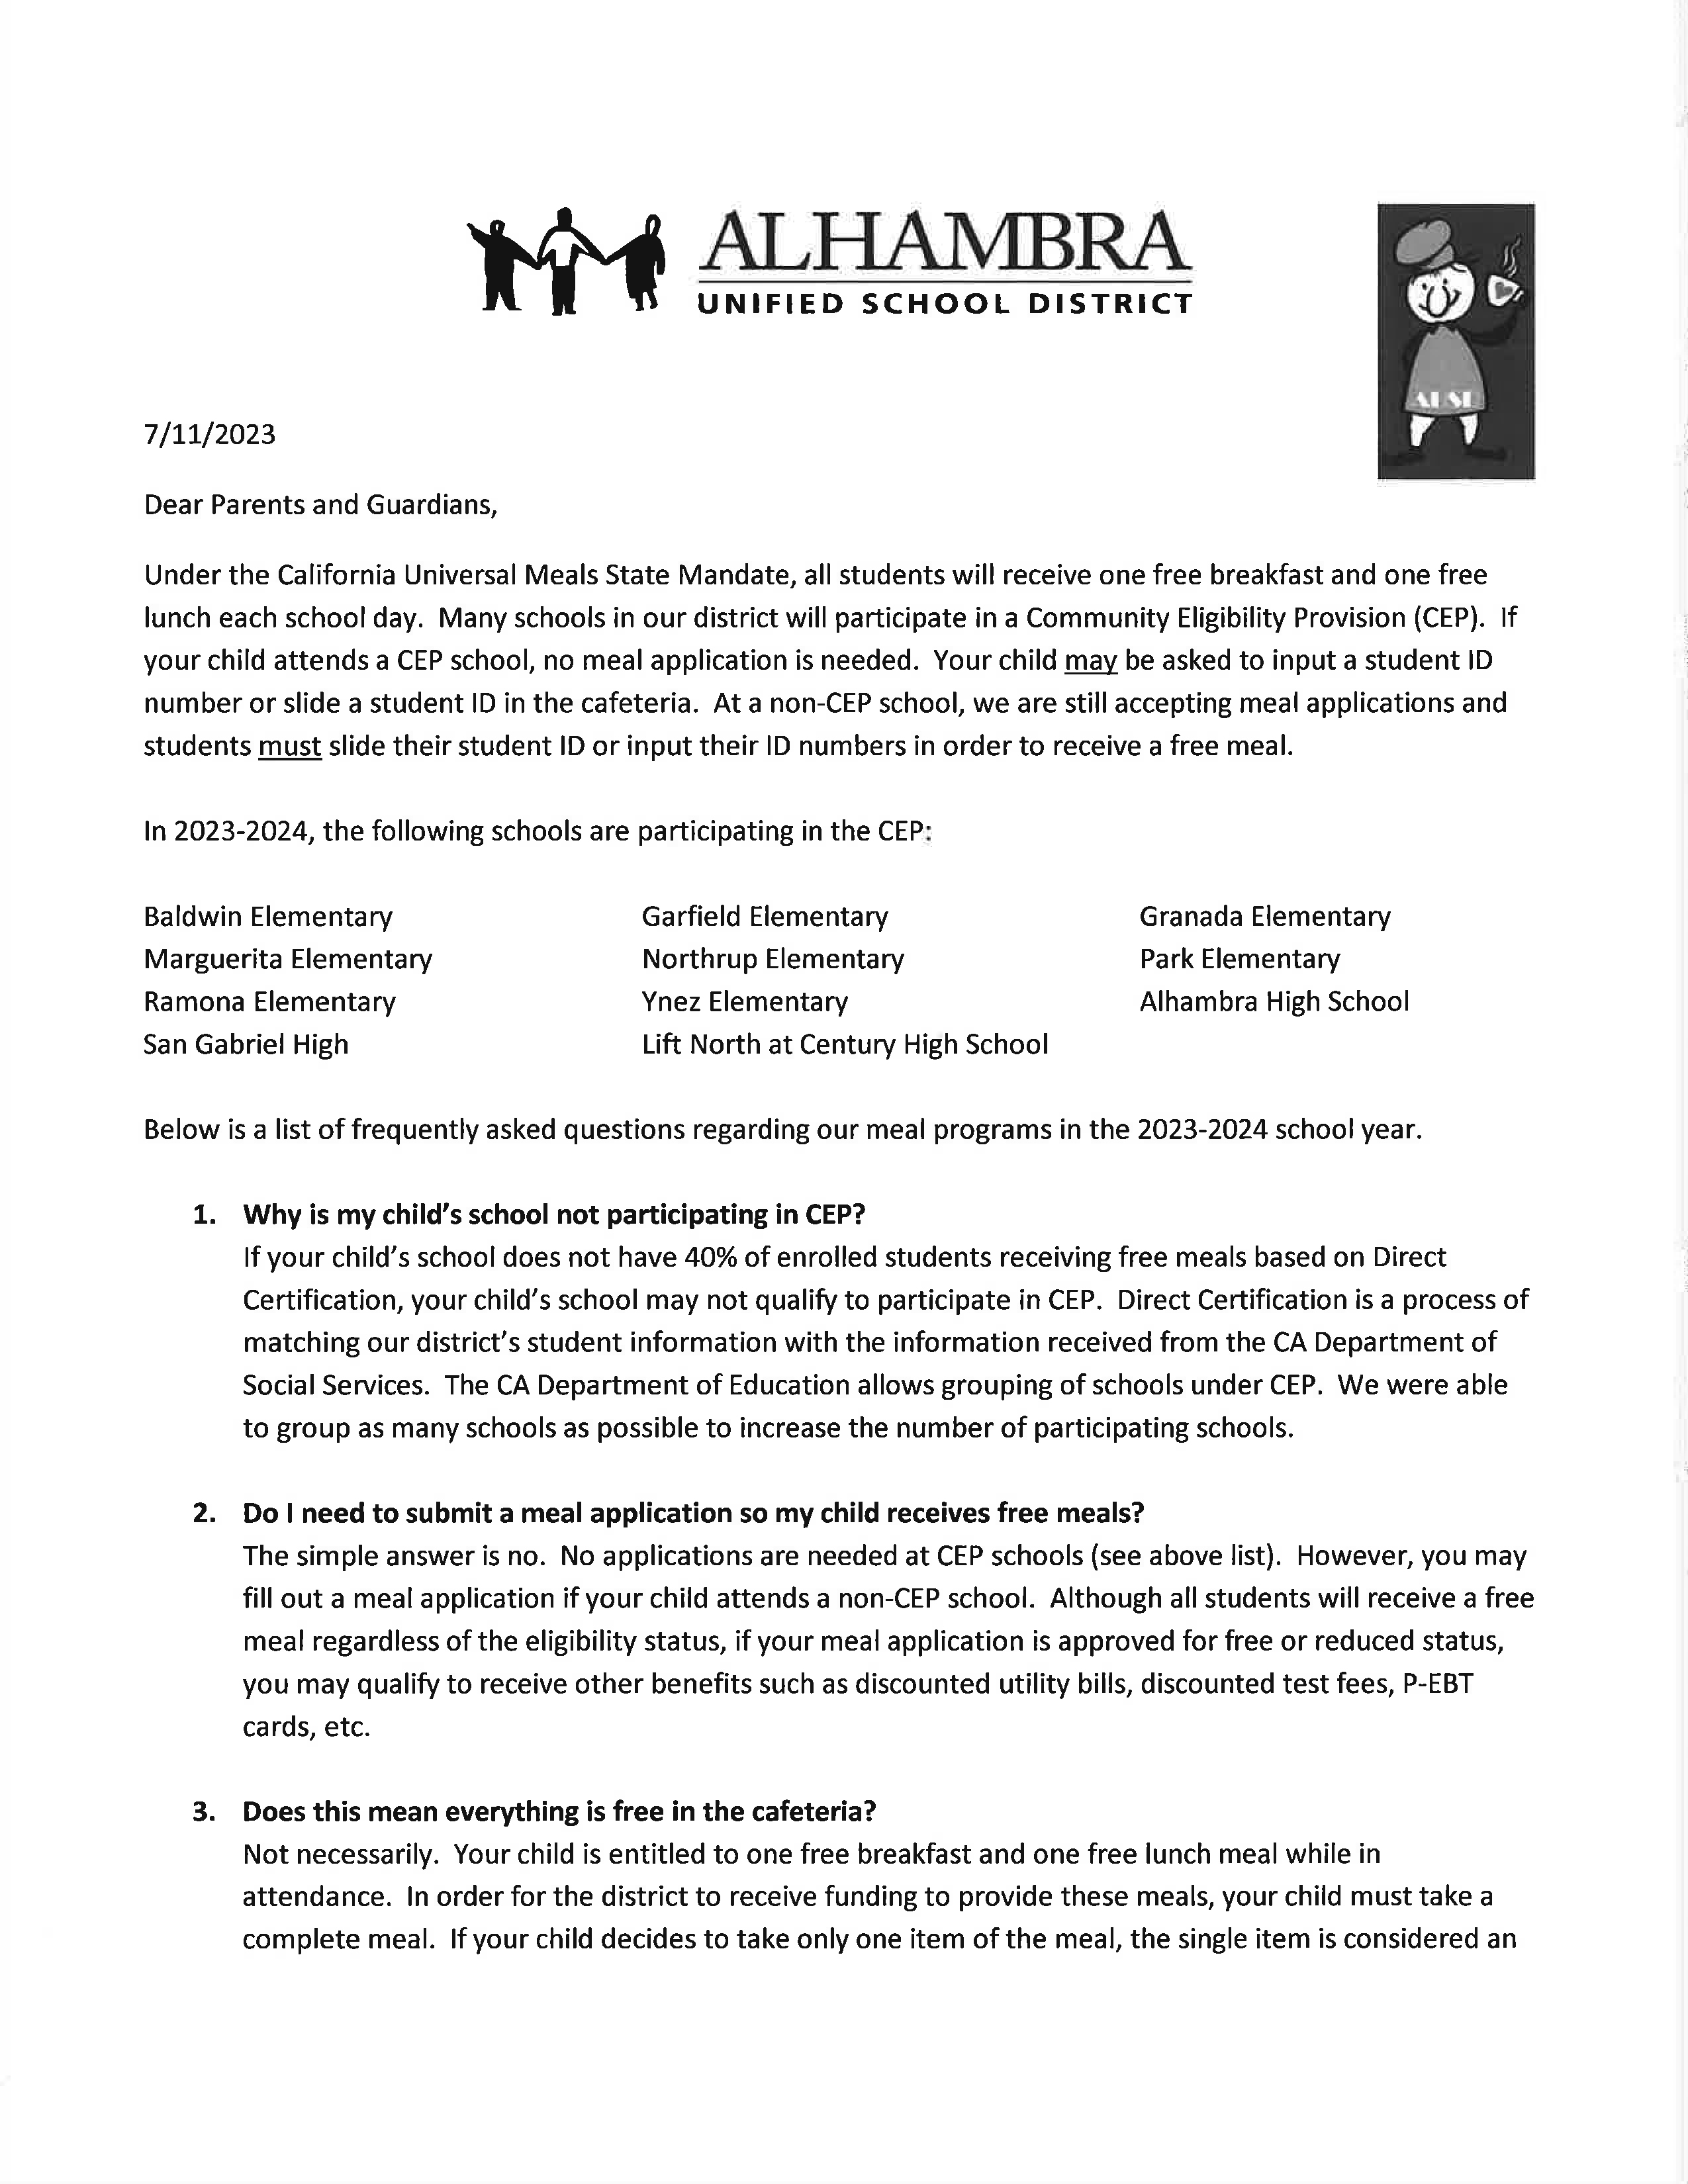 23-24 Letter to Parents with Q & A-1.jpg